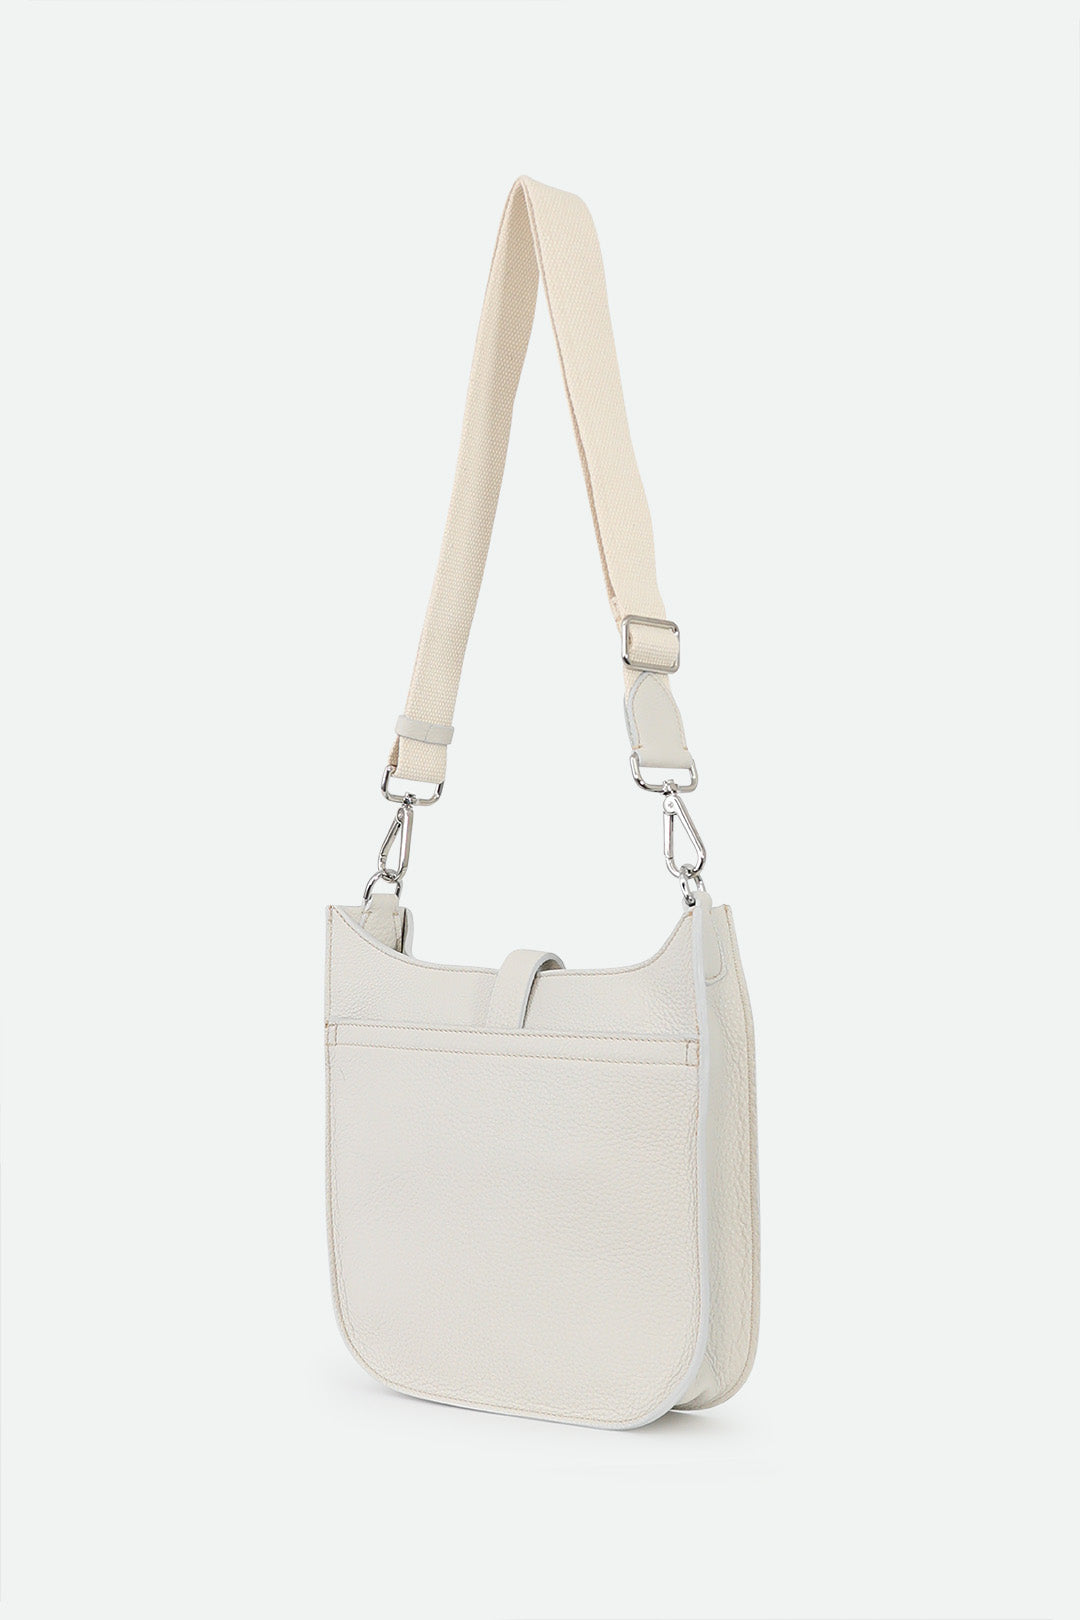 GIA ITALIAN LEATHER CROSSBODY BAG IN BUTTER WHITE - PRE-ORDER NOW